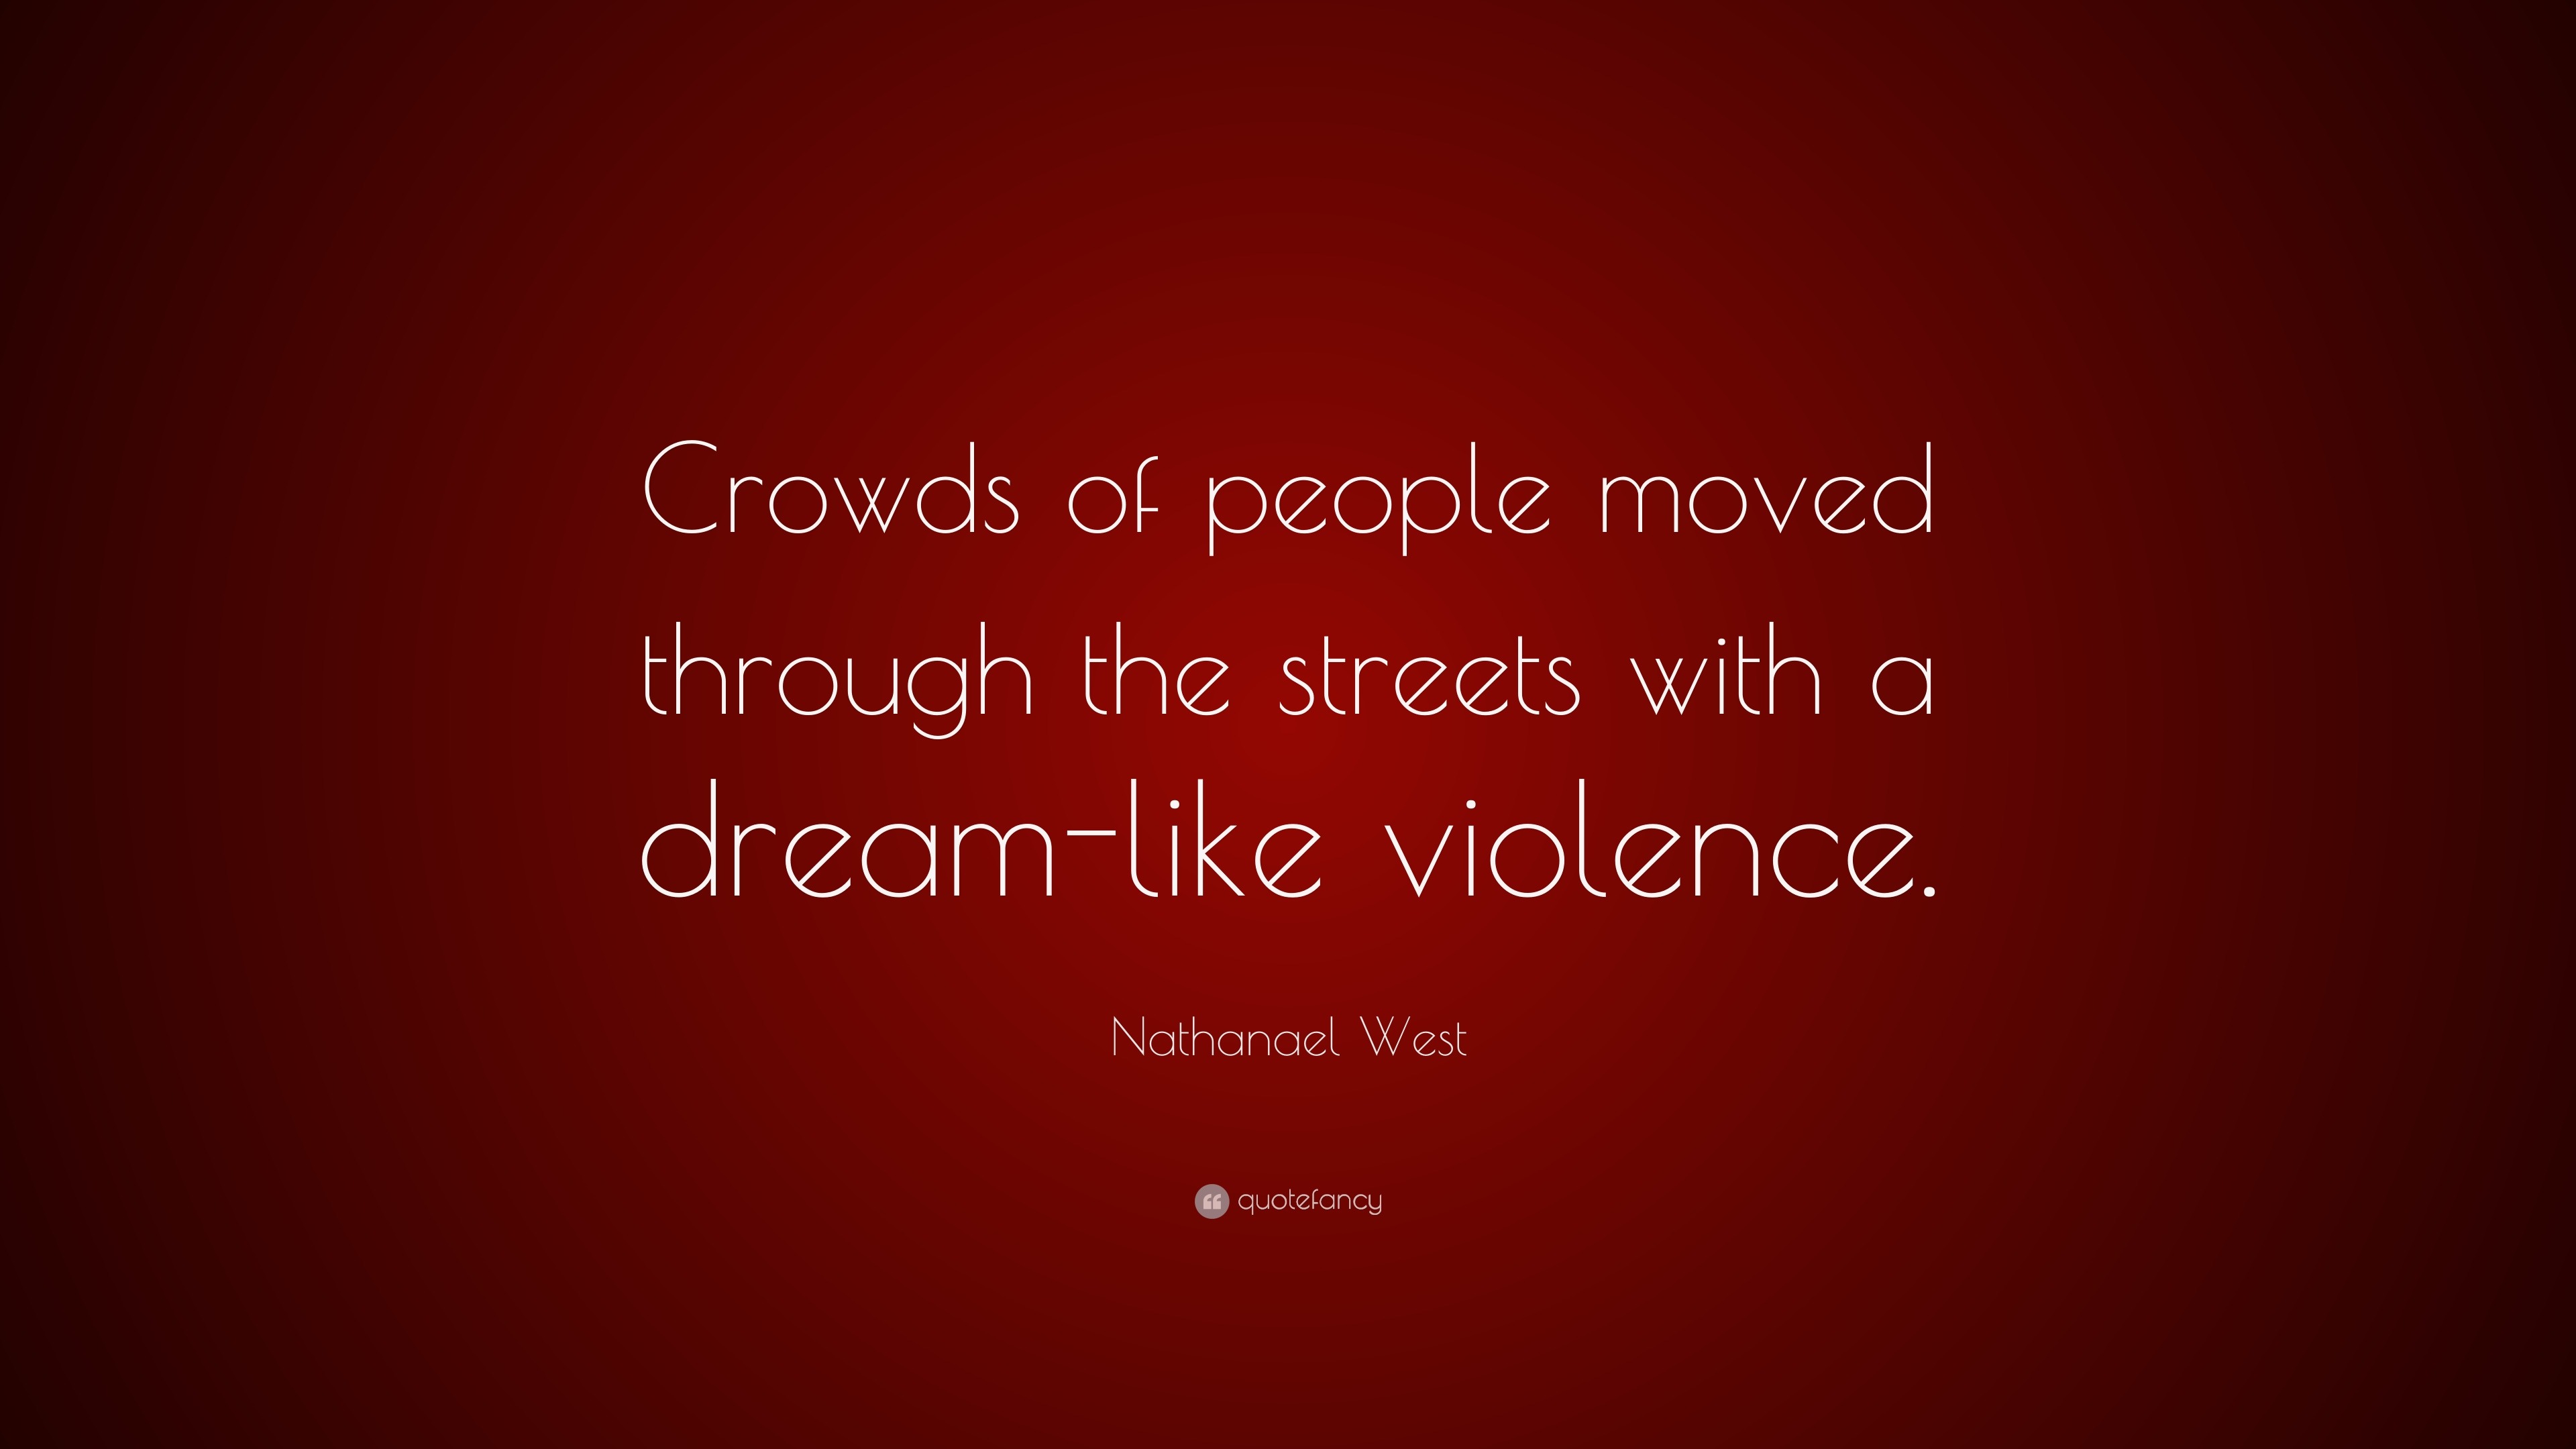 Nathanael West Quote: “Crowds of people moved through the streets with